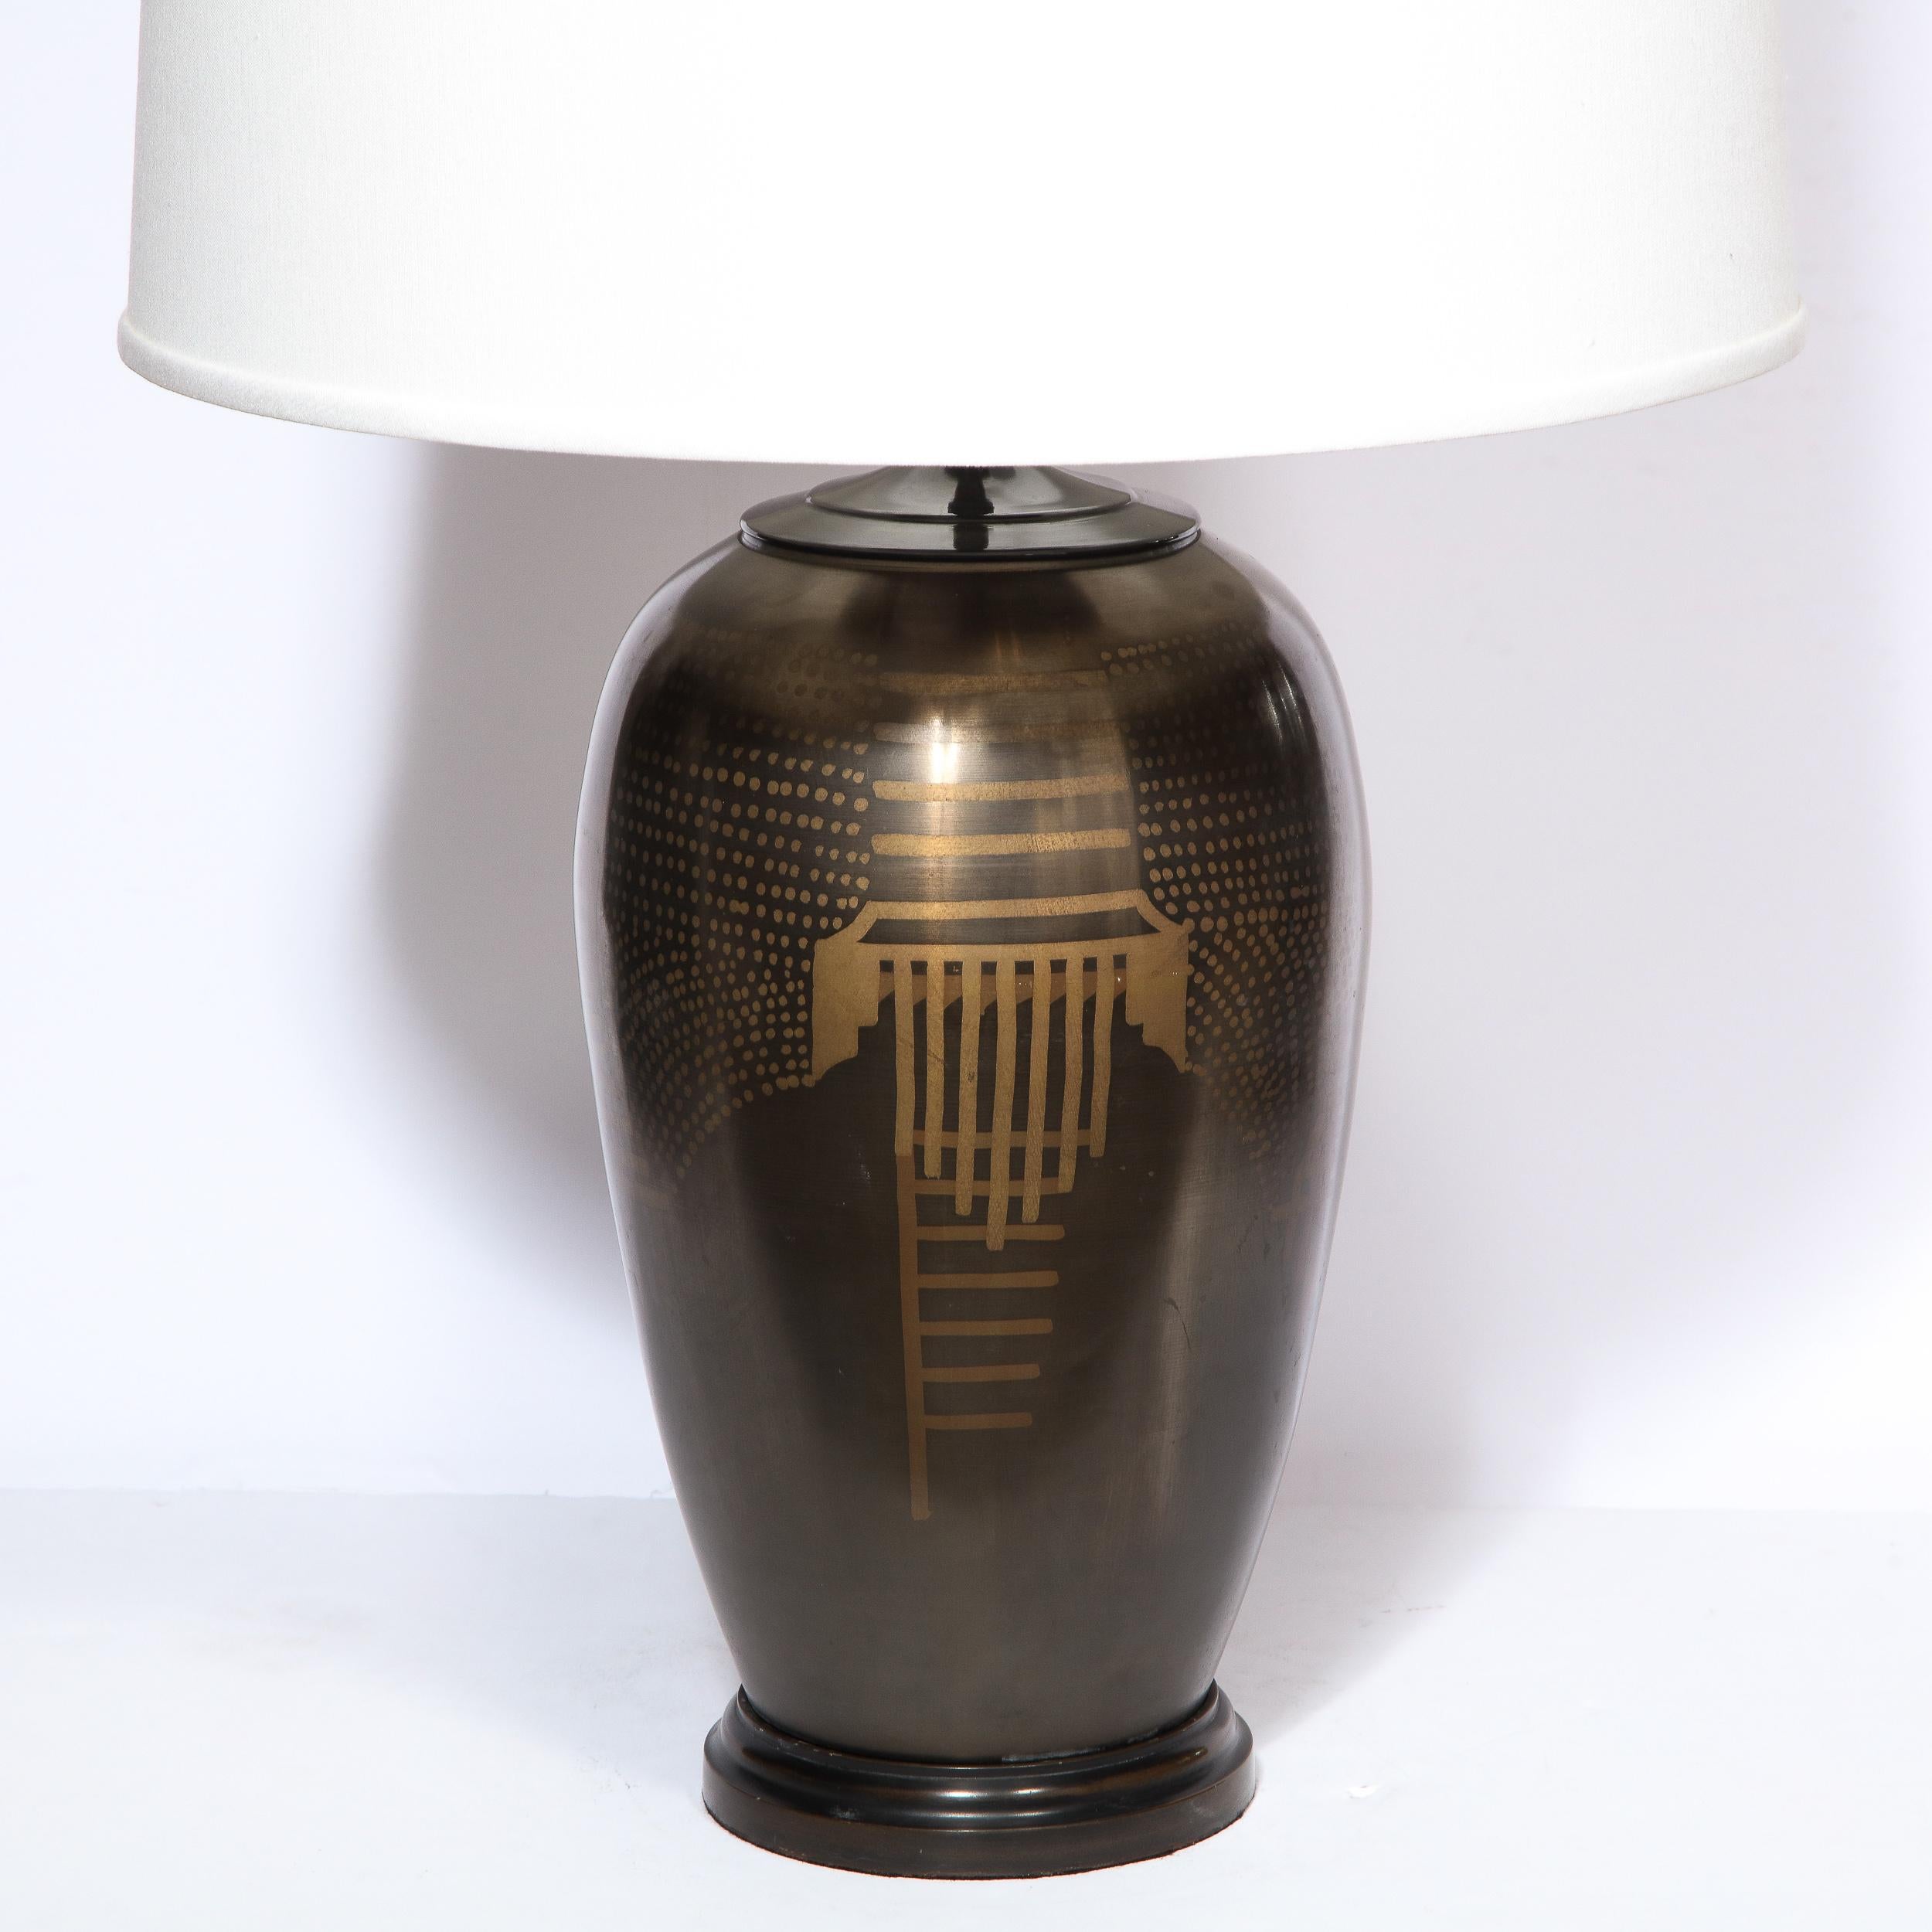 This stunning Art Deco revival table lamp was realized in the United States during the latter half of the 20th century. It features a beveled bronze circular base and a tiered skyscraper style neck. The sinuously curved body is replete with a wealth